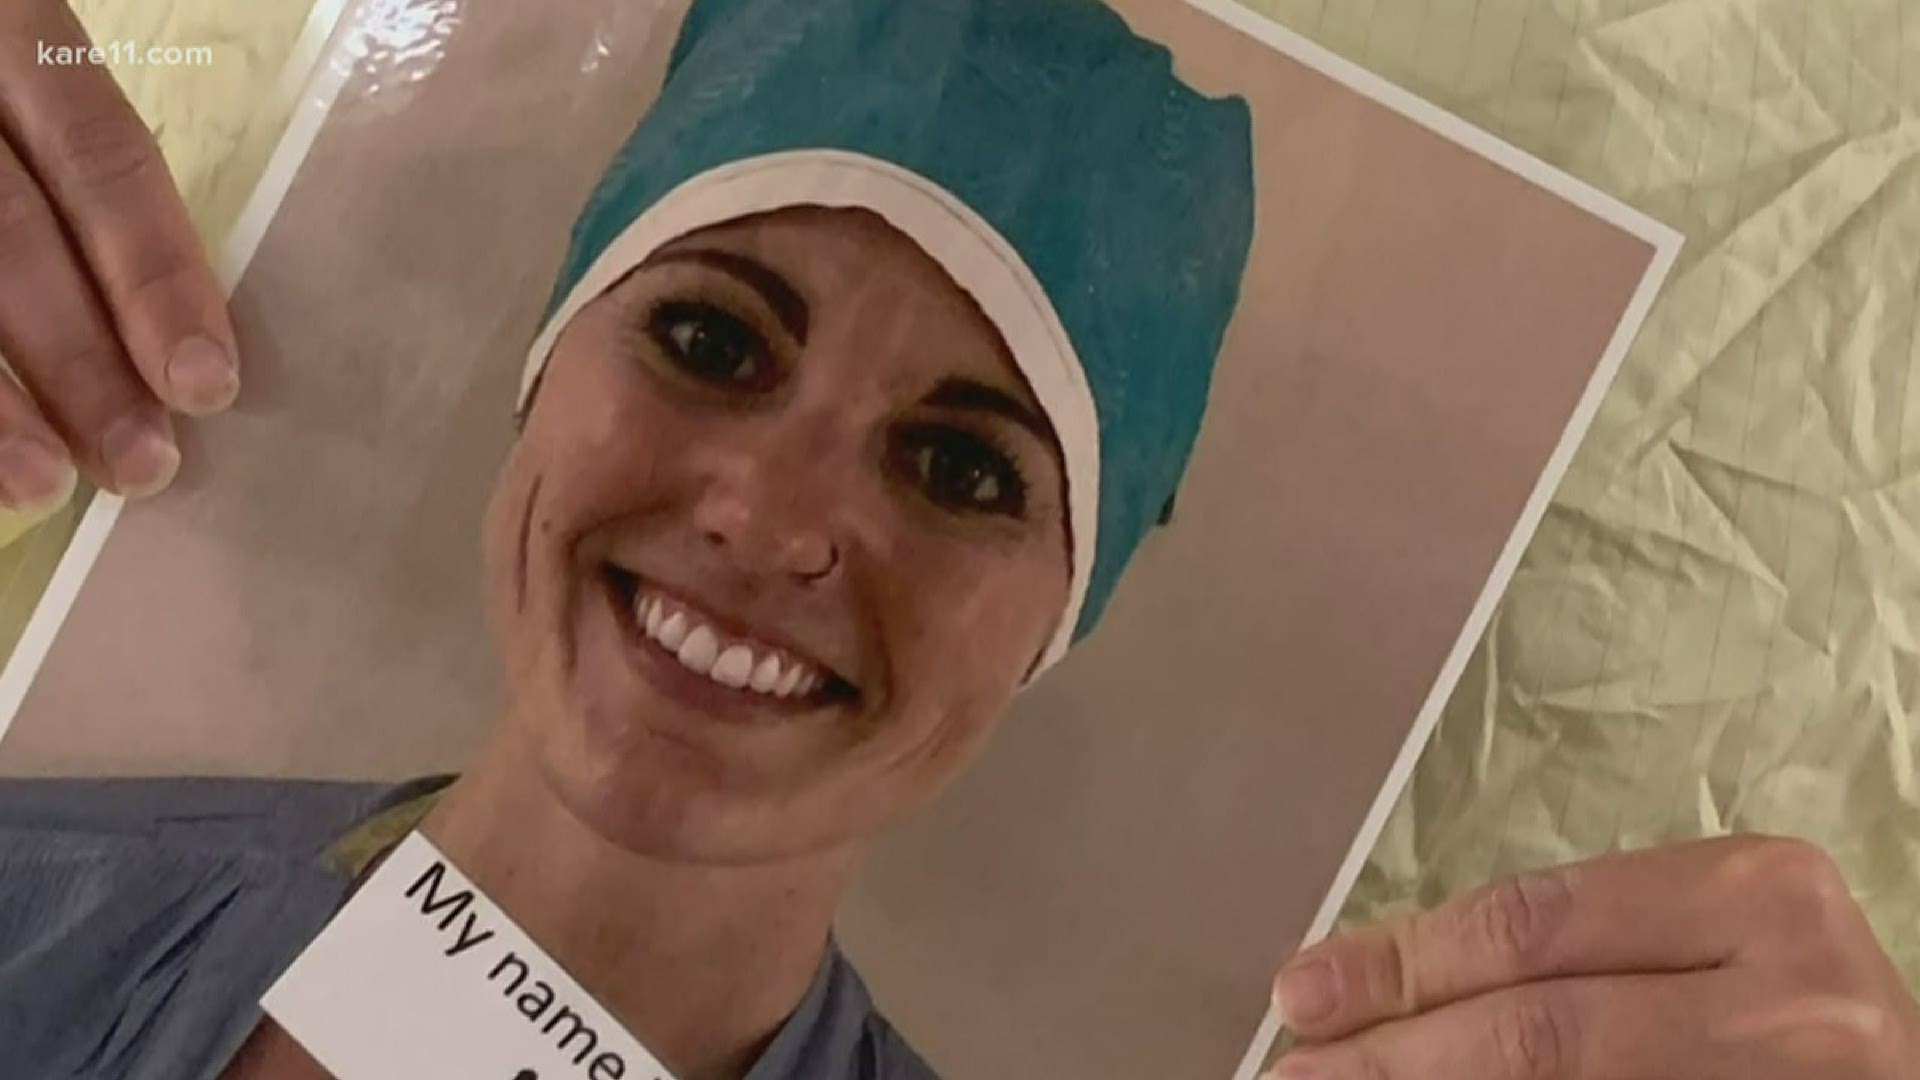 Nurses, docs & techs at M Health Fairview hospitals are posting pics of their smiling faces in their patients' rooms - the only way smiles can be seen.